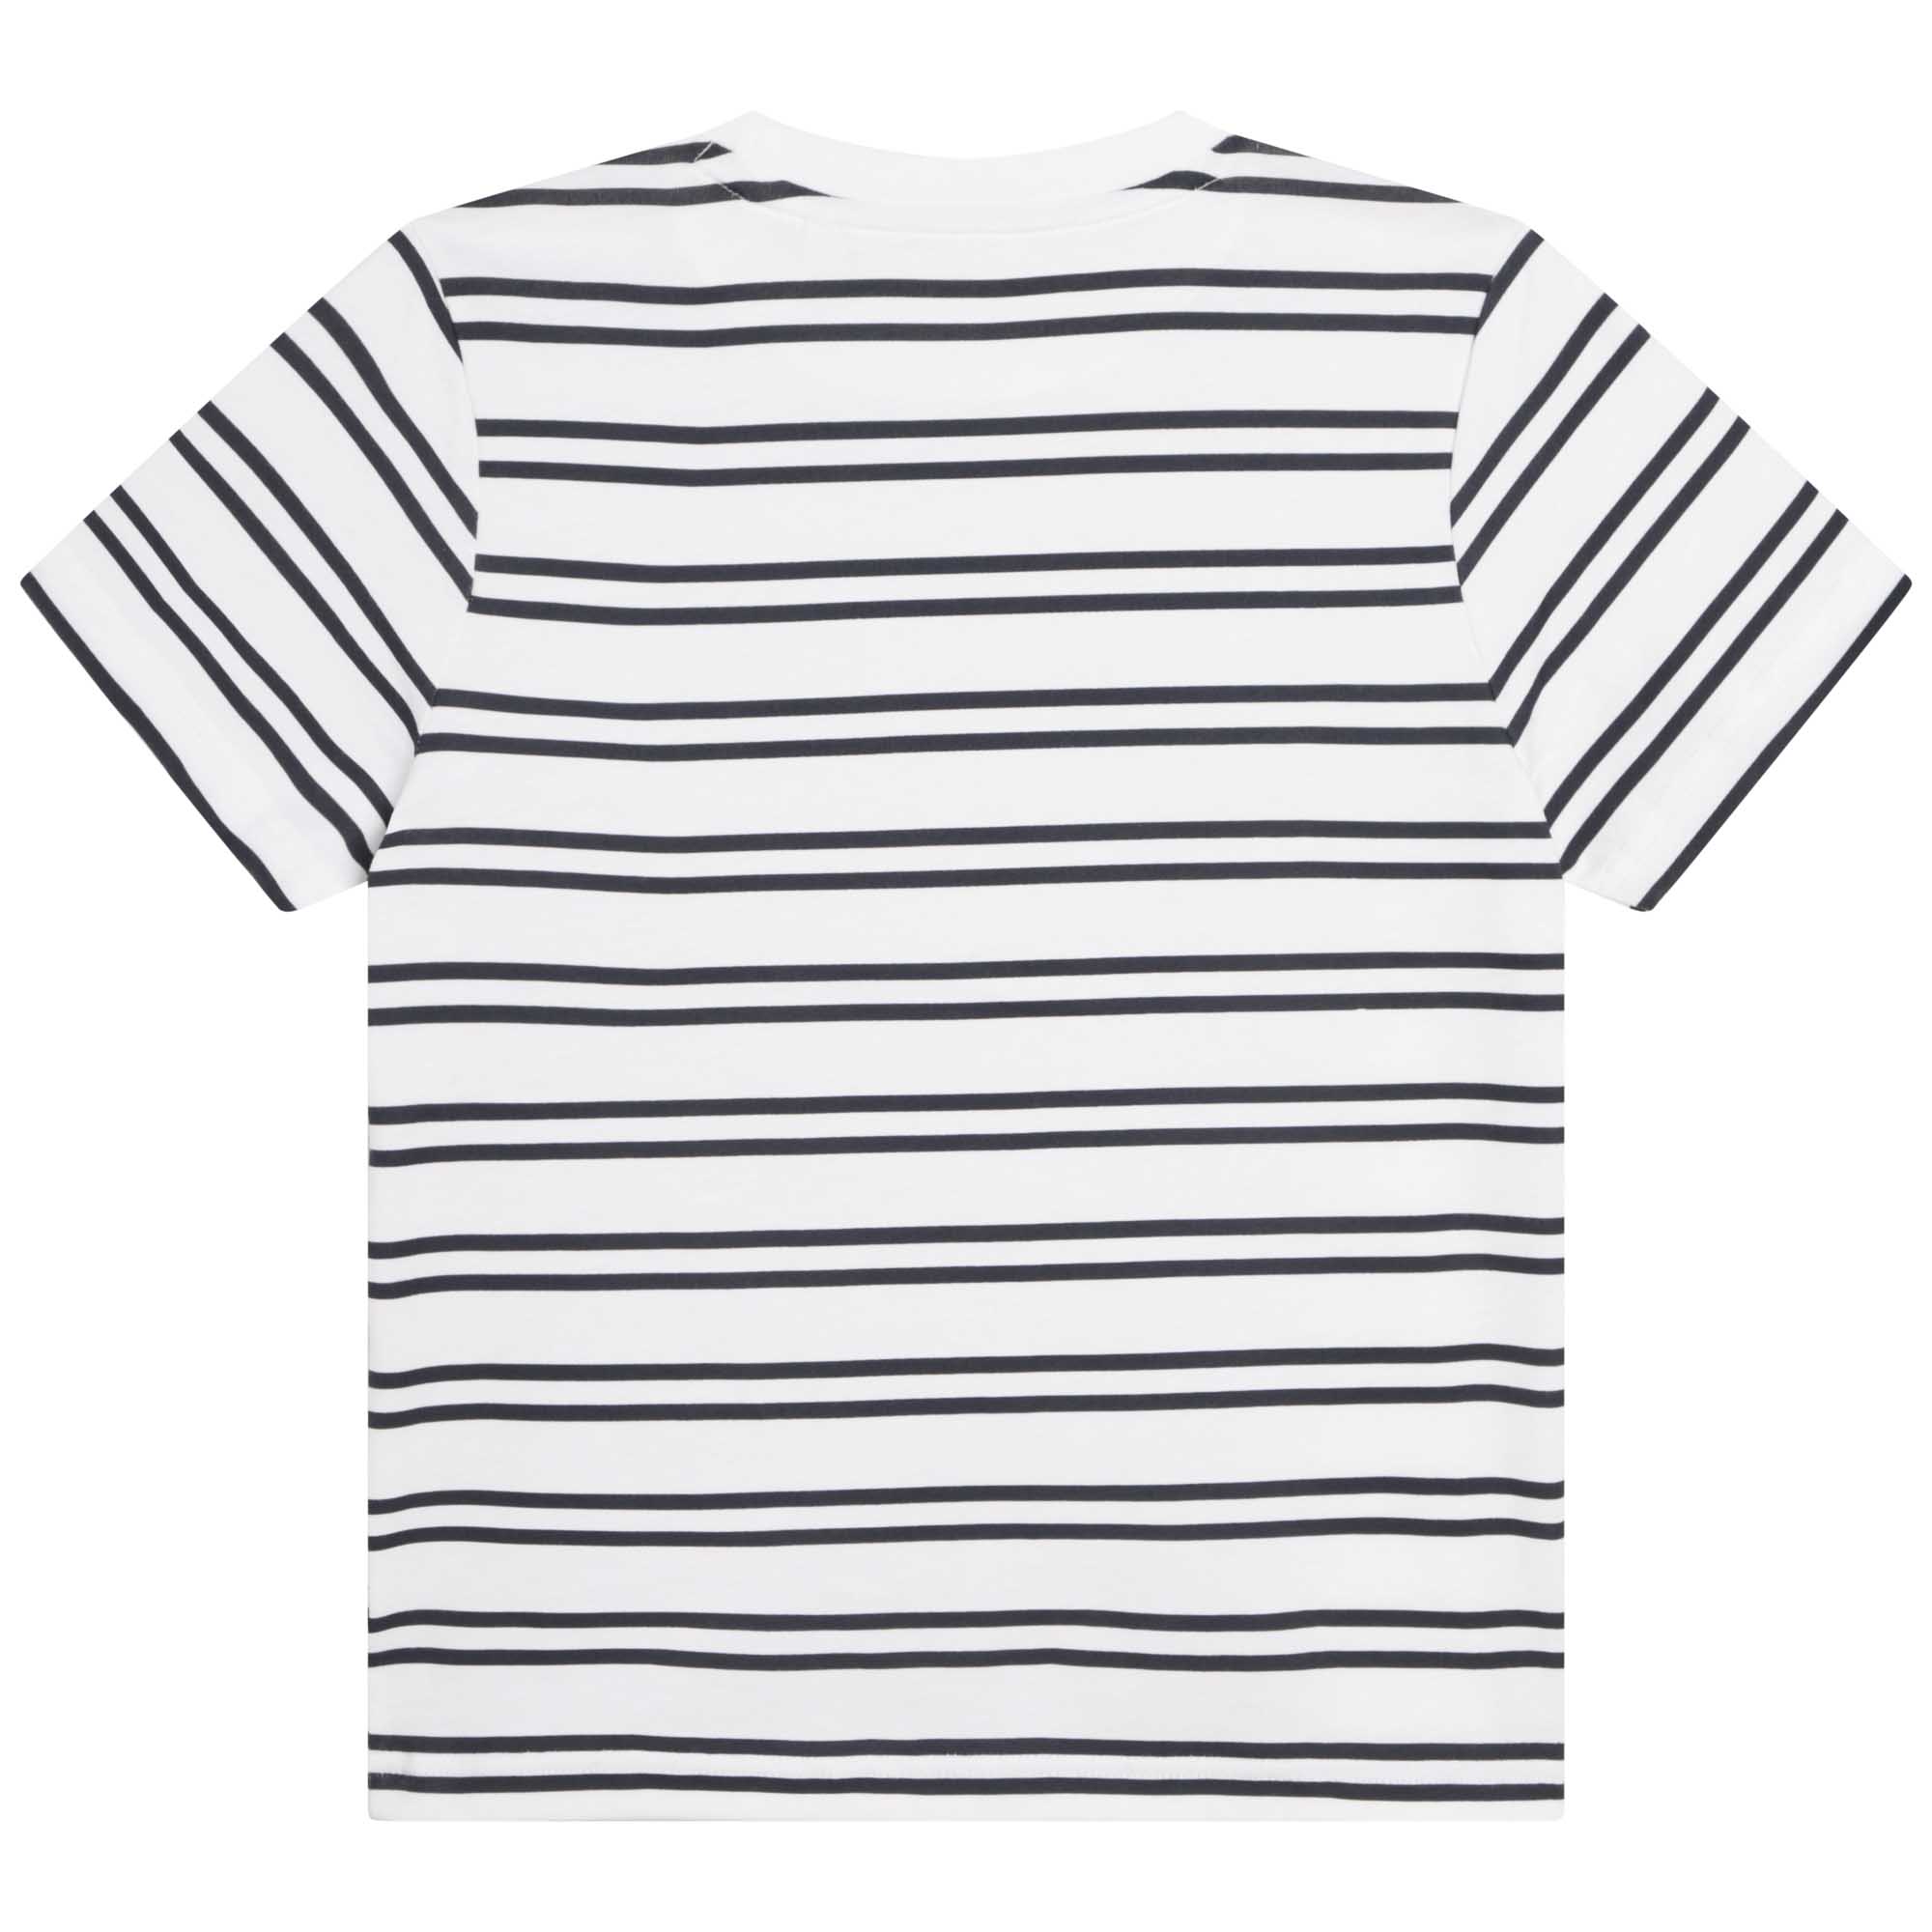 Striped T-shirt with patch AIGLE for UNISEX